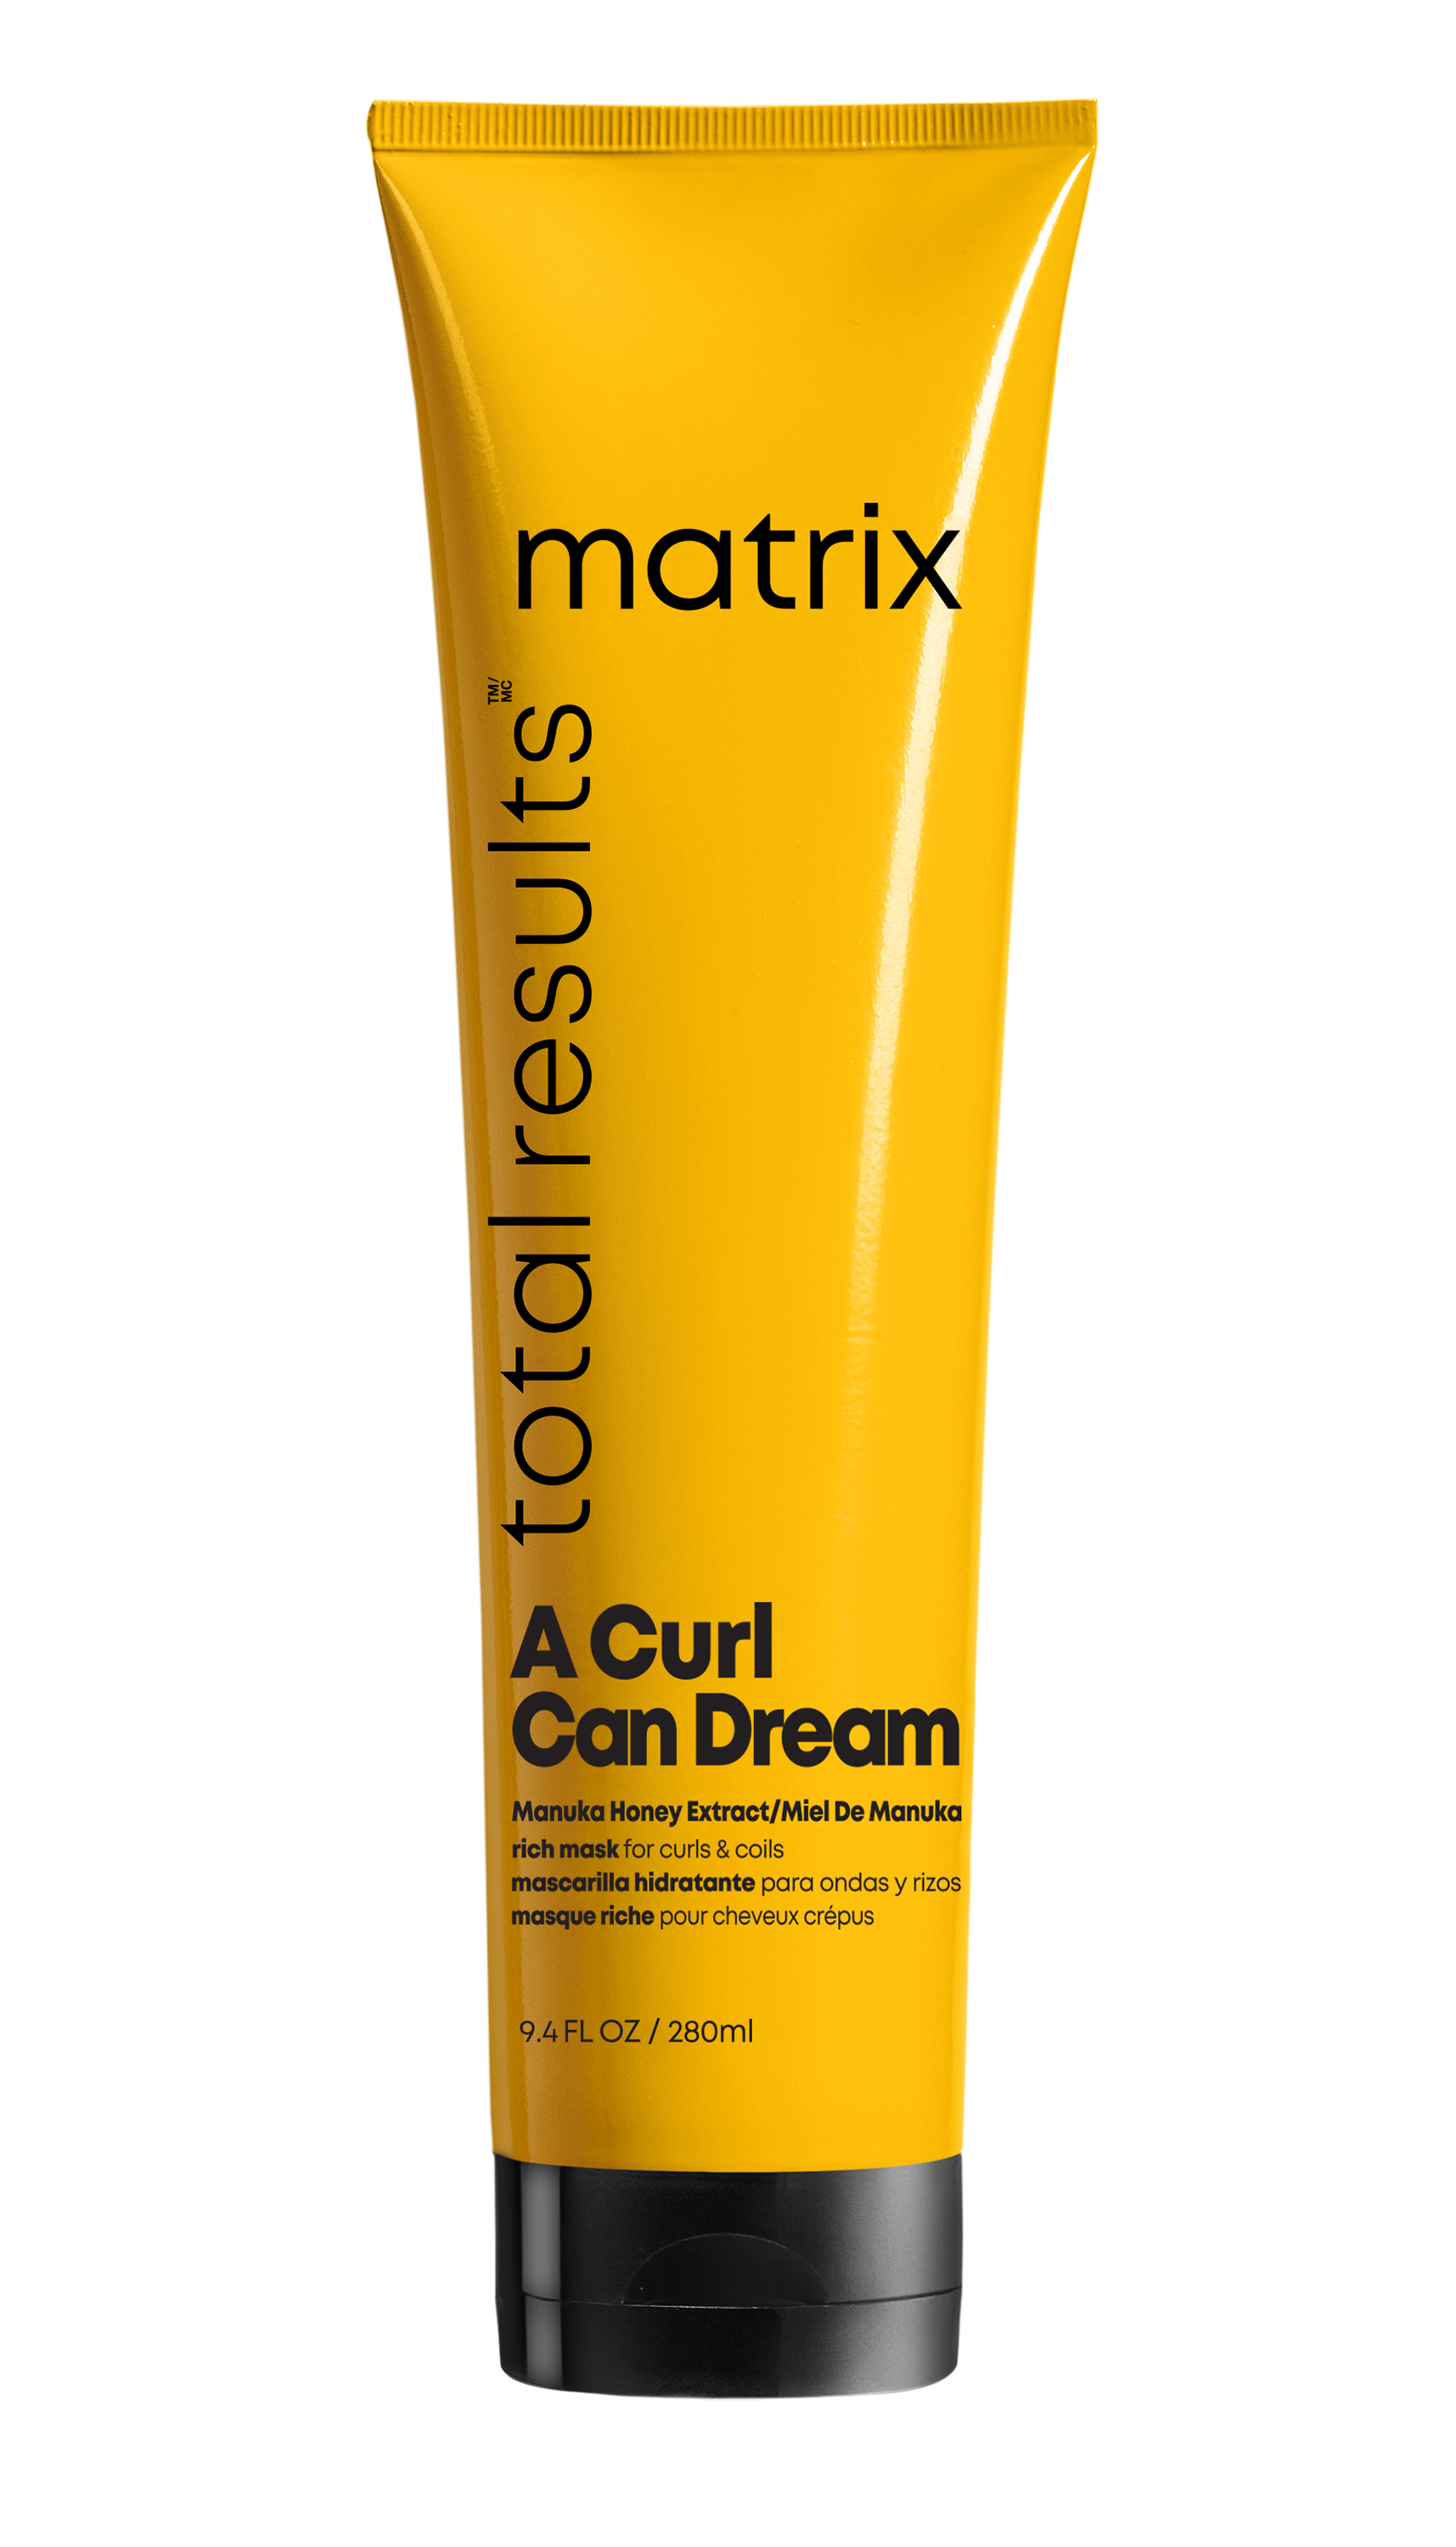 A Curl Can Dream Manuka Honey Extract Rich Mask for curls & coils €19,55* - 280ml